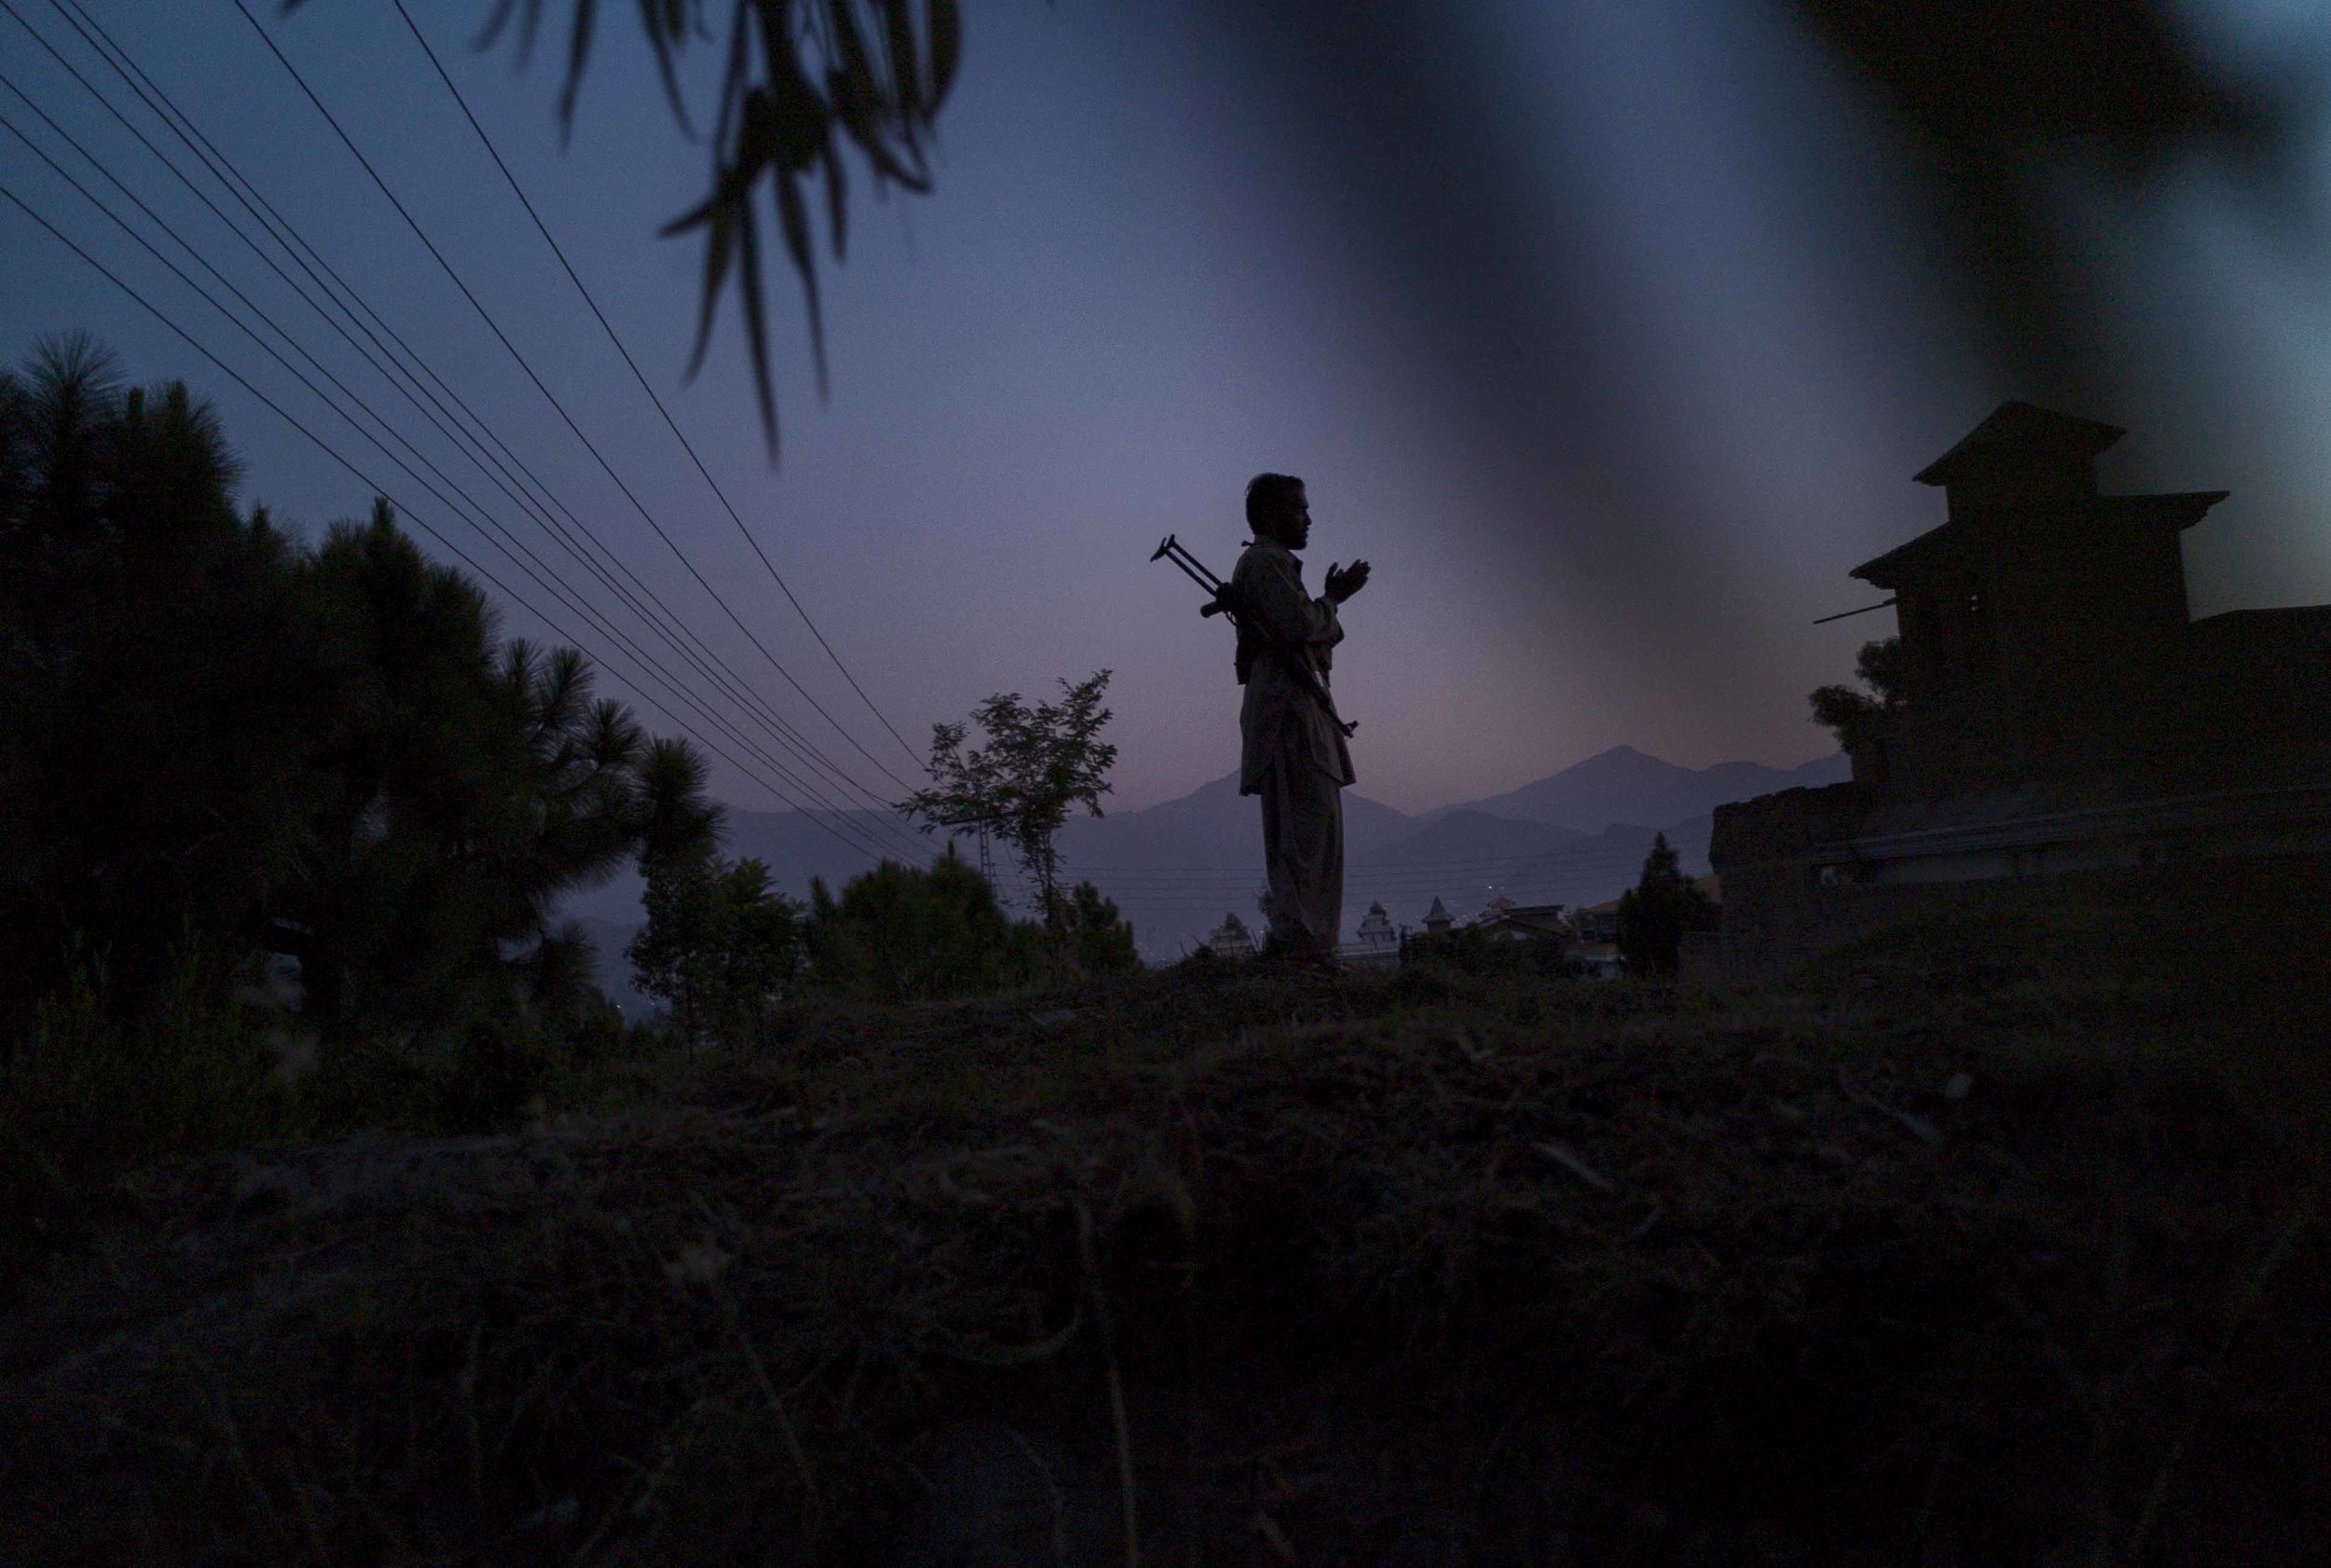  KANJU, PAKISTAN- SEPTEMBER 2009 
With his Kalashnikov rifle strapped to his back, a guard from a privte militia performs Isha Nimaz in a garden overlooking the Swat Valley in Kanju Township at dusk. Over the last week, the local population roused by